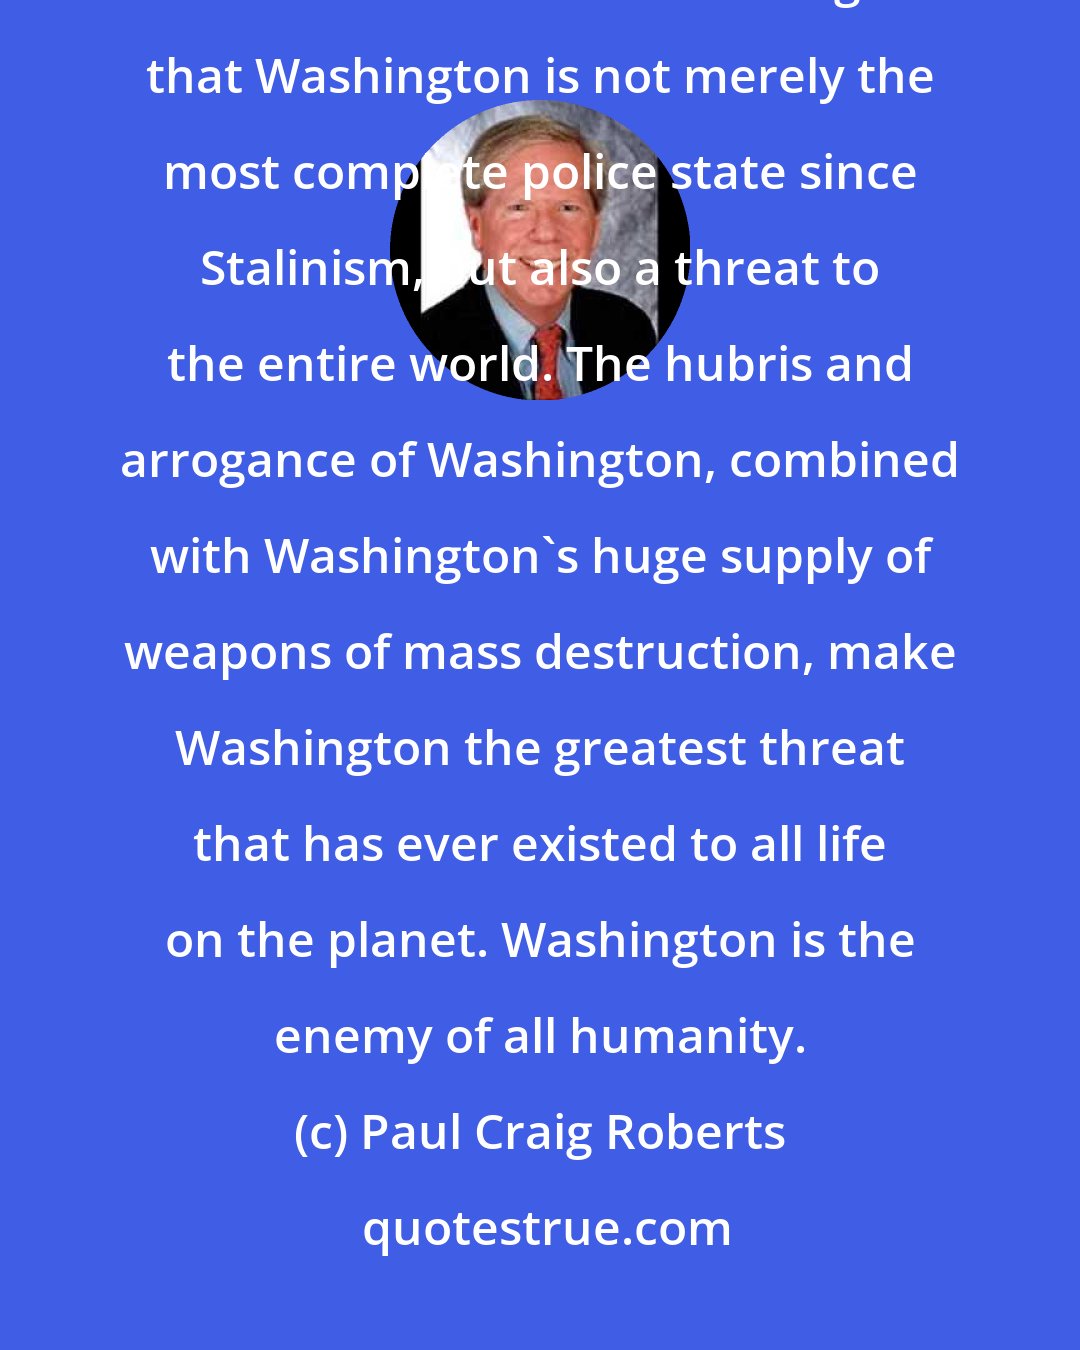 Paul Craig Roberts: Americans need to understand that they have lost their country. The rest of the world needs to recognize that Washington is not merely the most complete police state since Stalinism, but also a threat to the entire world. The hubris and arrogance of Washington, combined with Washington's huge supply of weapons of mass destruction, make Washington the greatest threat that has ever existed to all life on the planet. Washington is the enemy of all humanity.